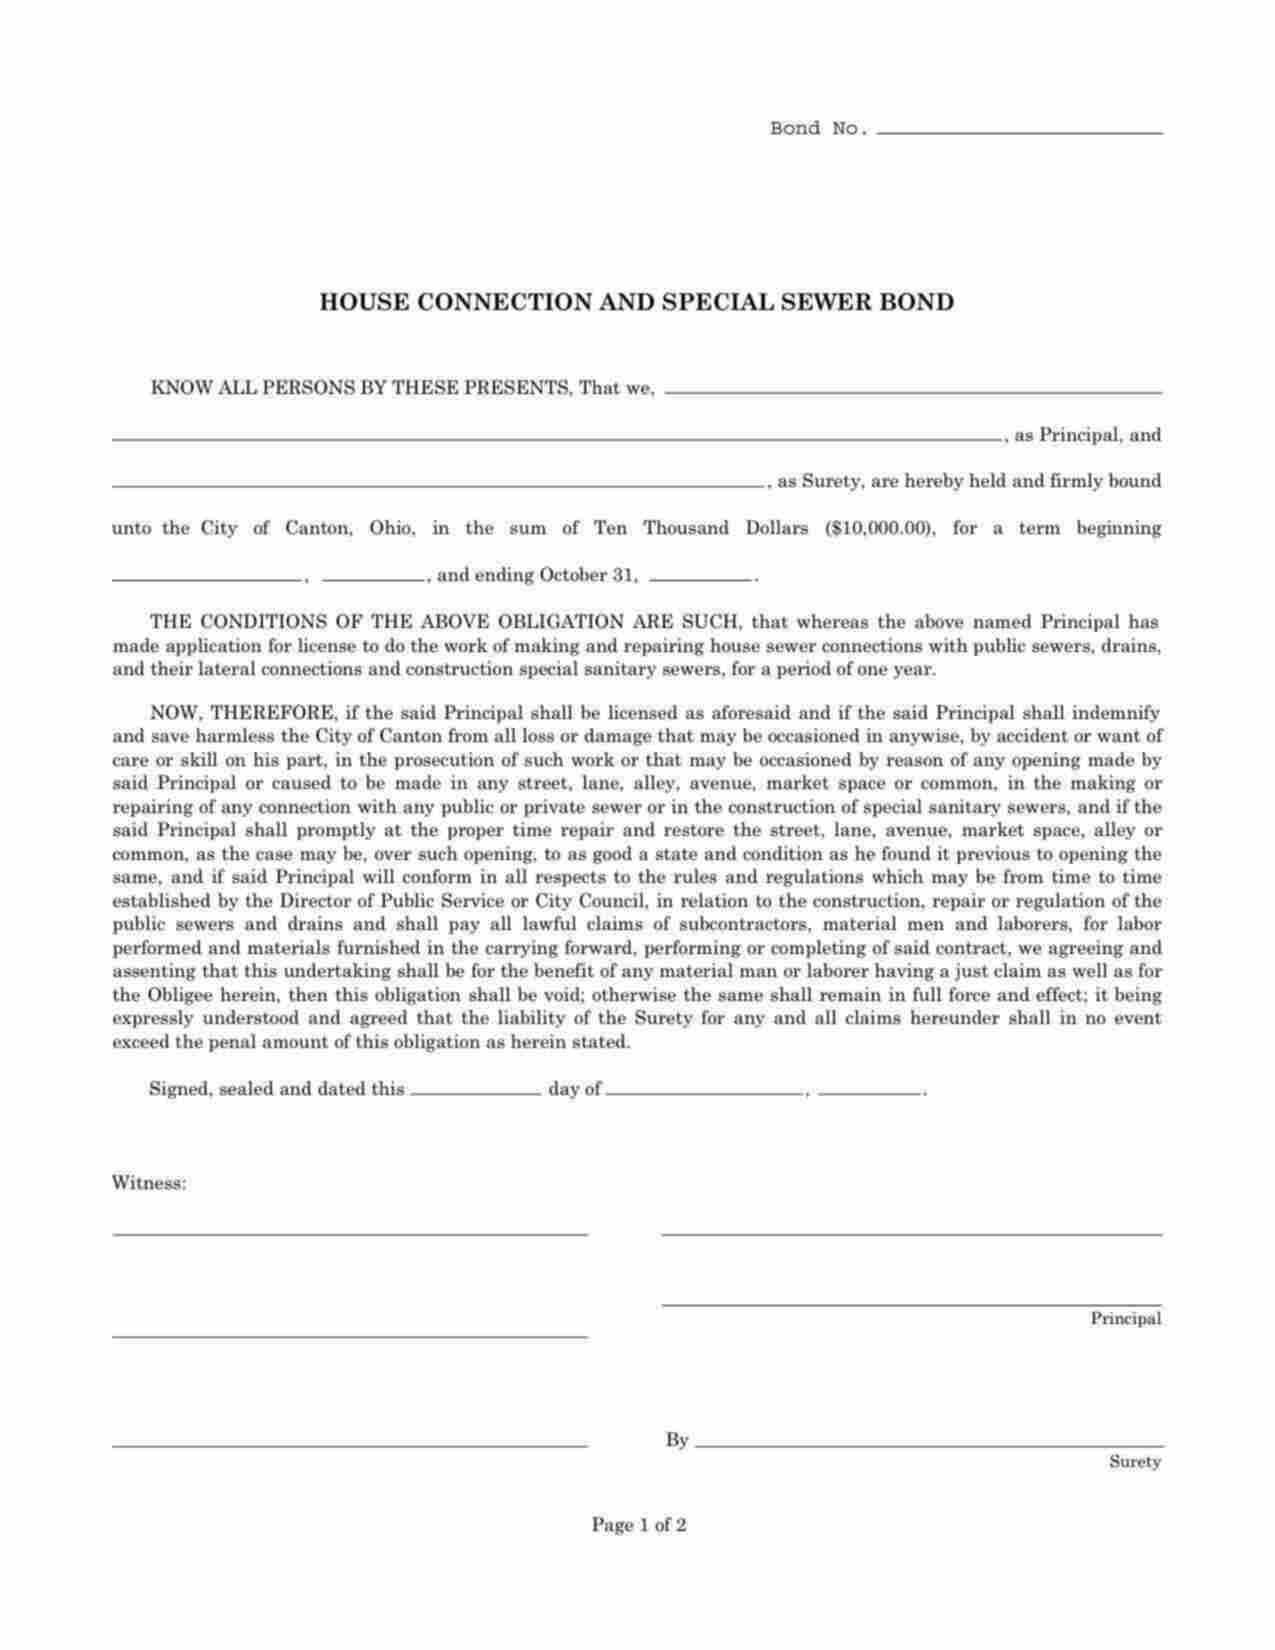 Ohio House Connection and Special Sewer Bond Form